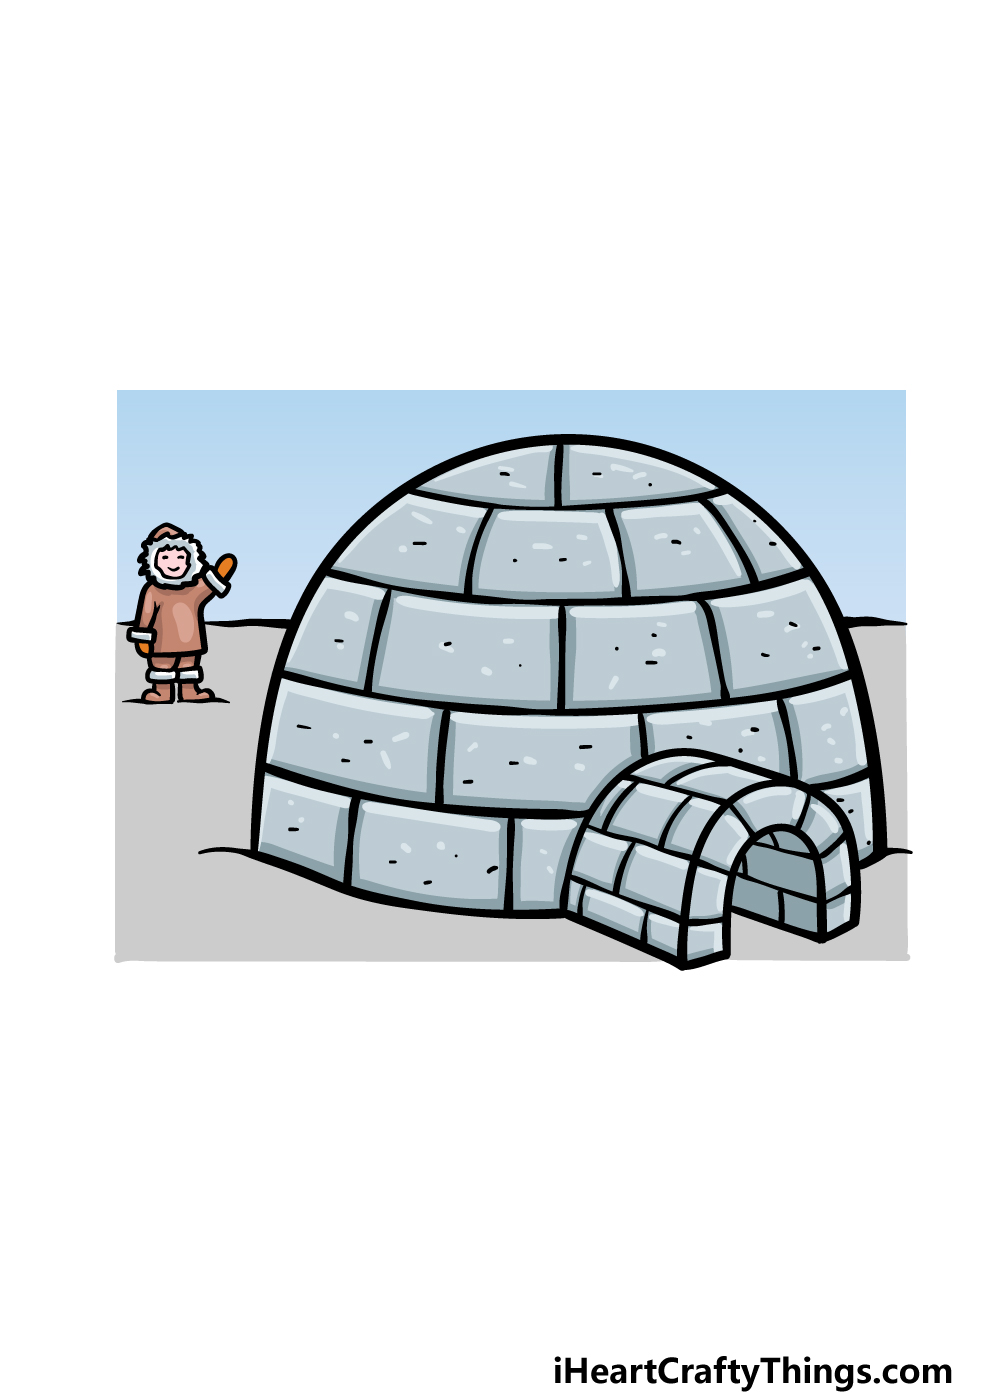 Igloo Snow House Or Snow Hut Drawing Or Doodle Igloo Illustration In  Minimalist Freehand Style Stock Illustration - Download Image Now - iStock